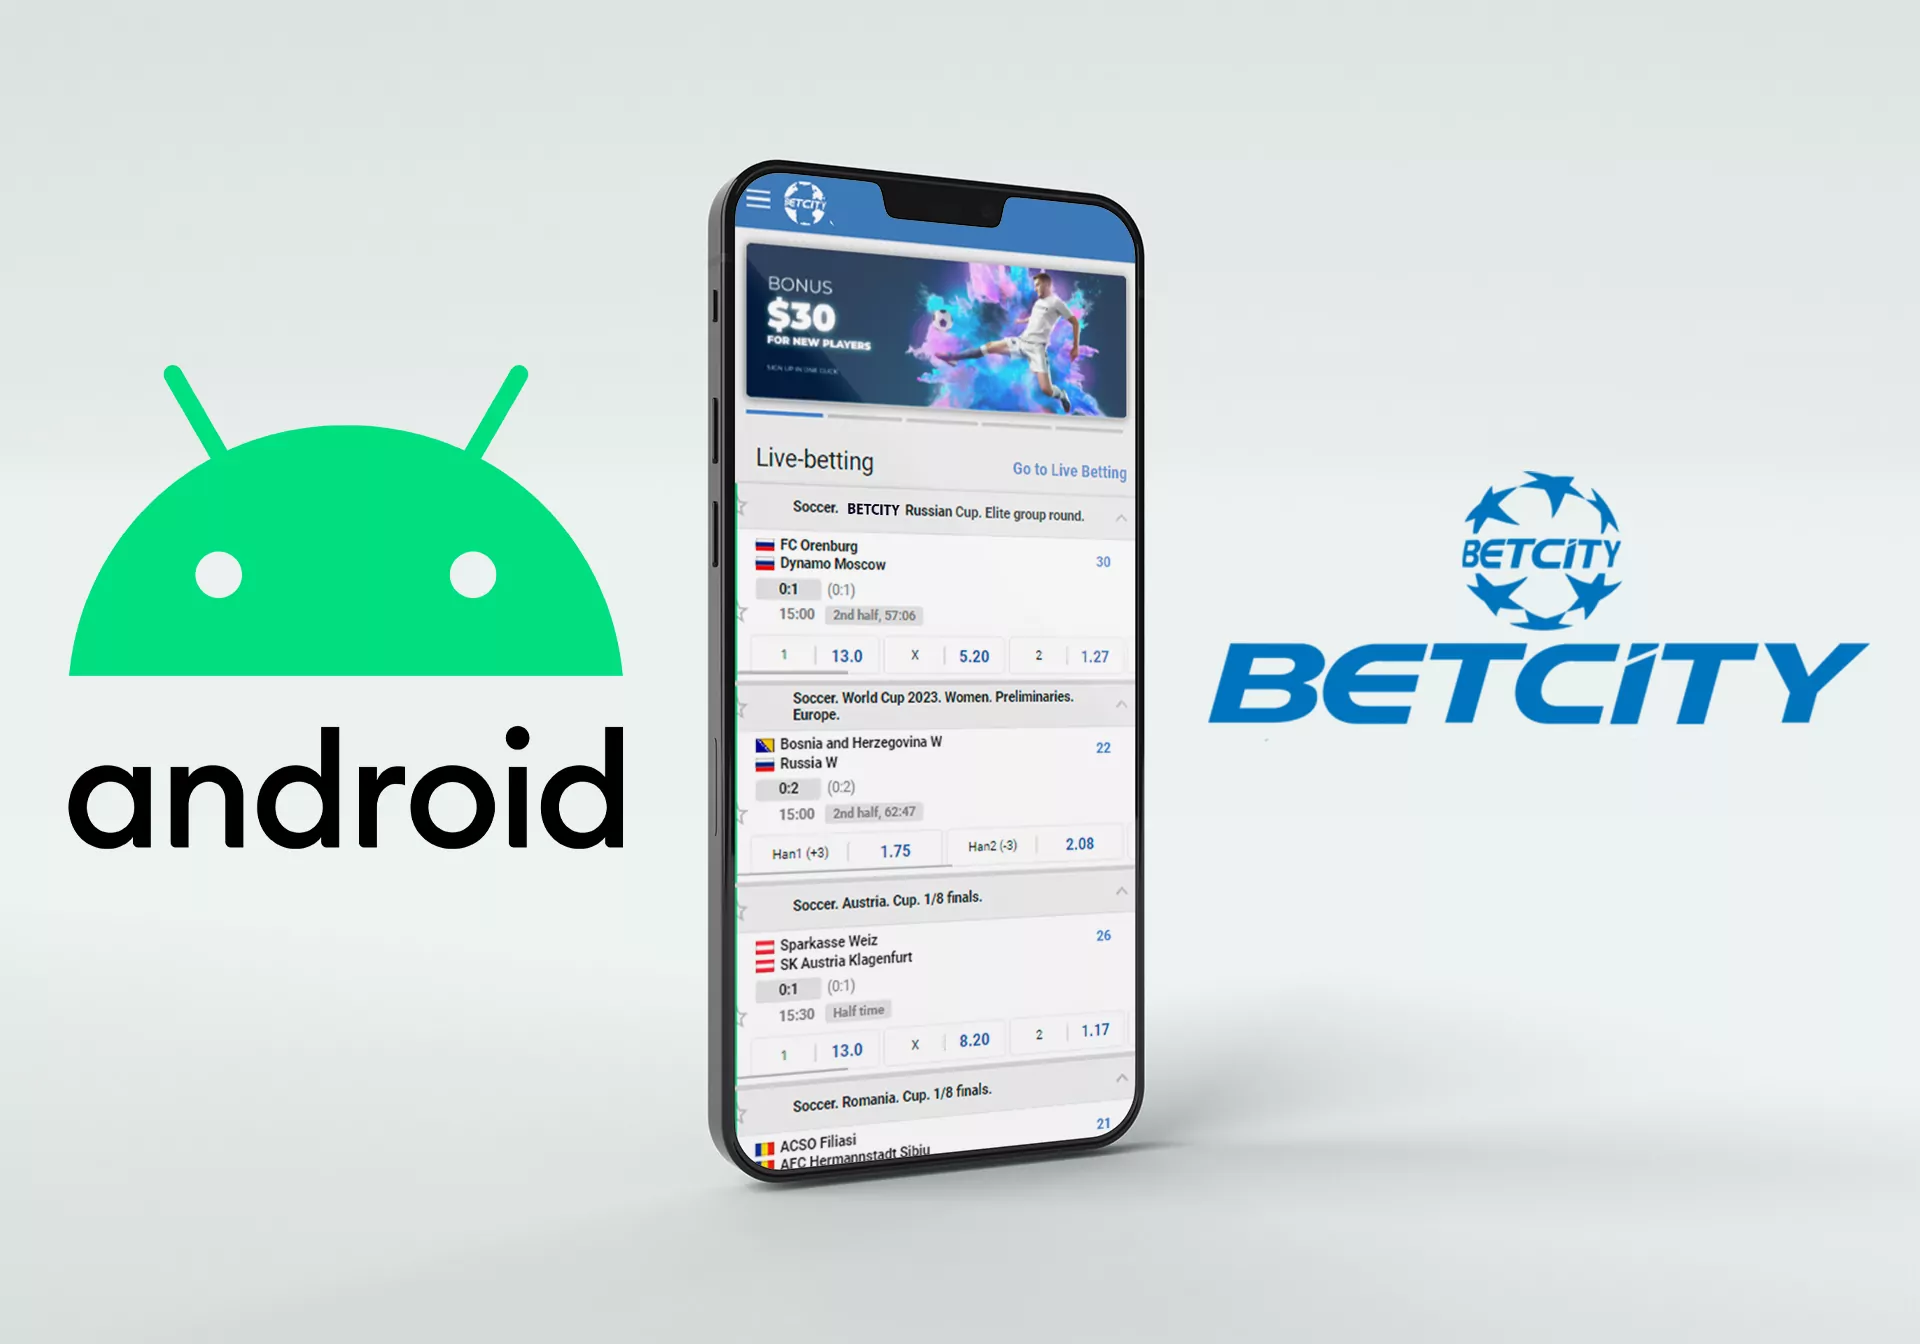 Android app will help you to place bets at Betcity whenever you want.